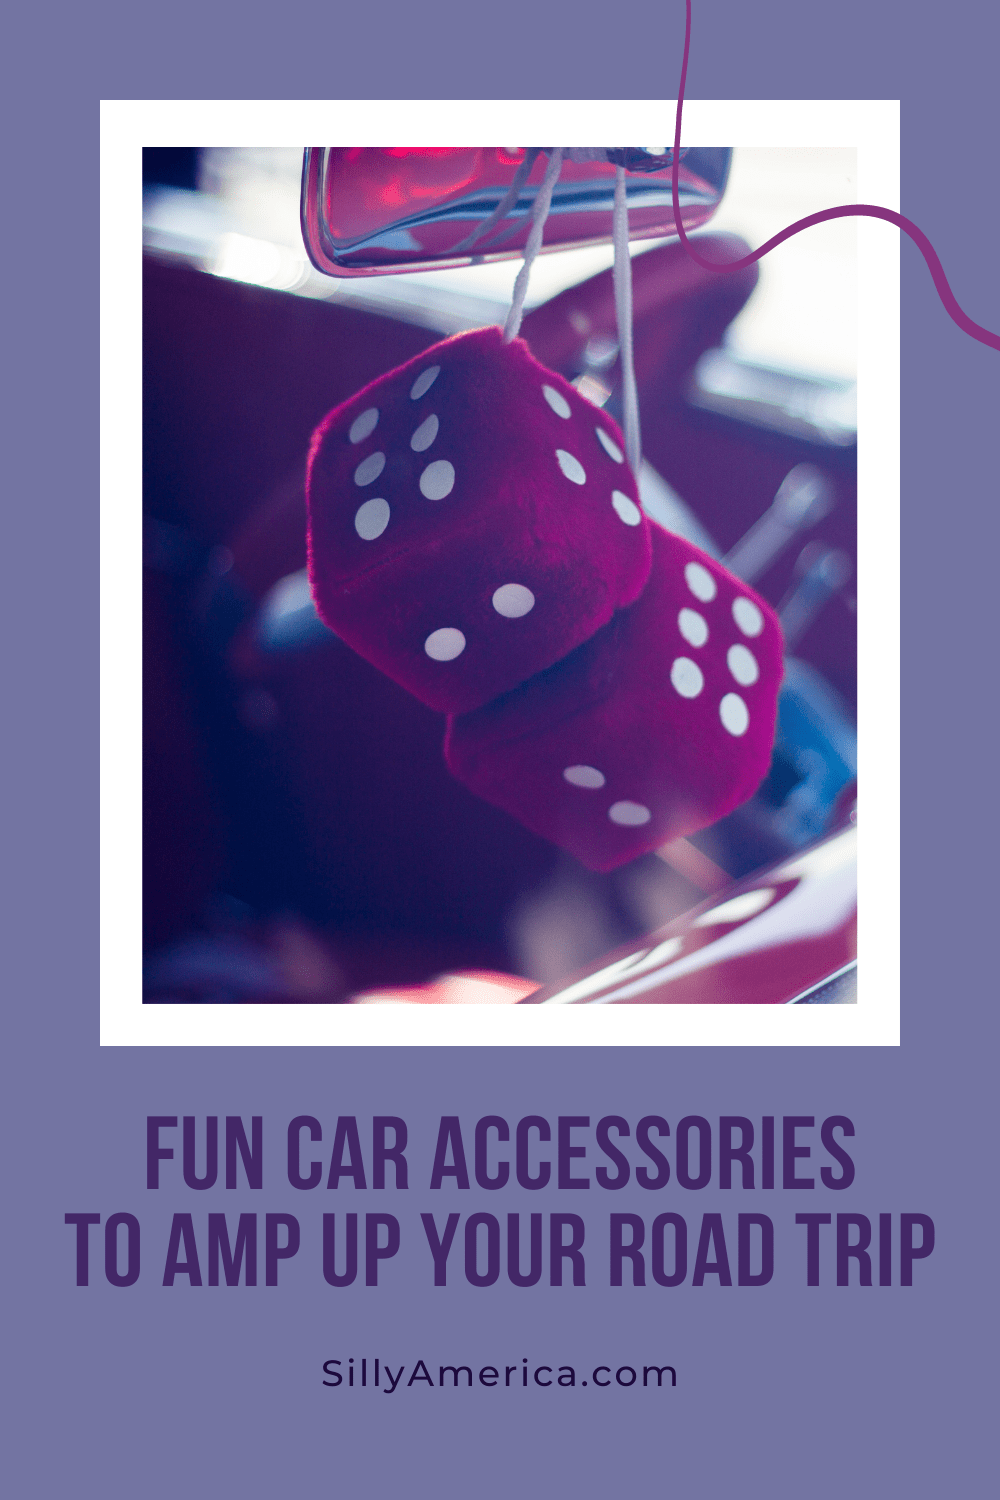 When taking a road trip you're going to be spending a lot of time in your car . Amp up your trip by decking your vehicle out with some fun car accessories that will make your car uniquely yours. These accessories and cool things to add to your car will make your long drive that much better. Whether you want something to keep your drinks cool or your car looking hot, read on to find something you didn't know your car needed. #RoadTrip #Car #CarAccessories #RoadTripPlanning